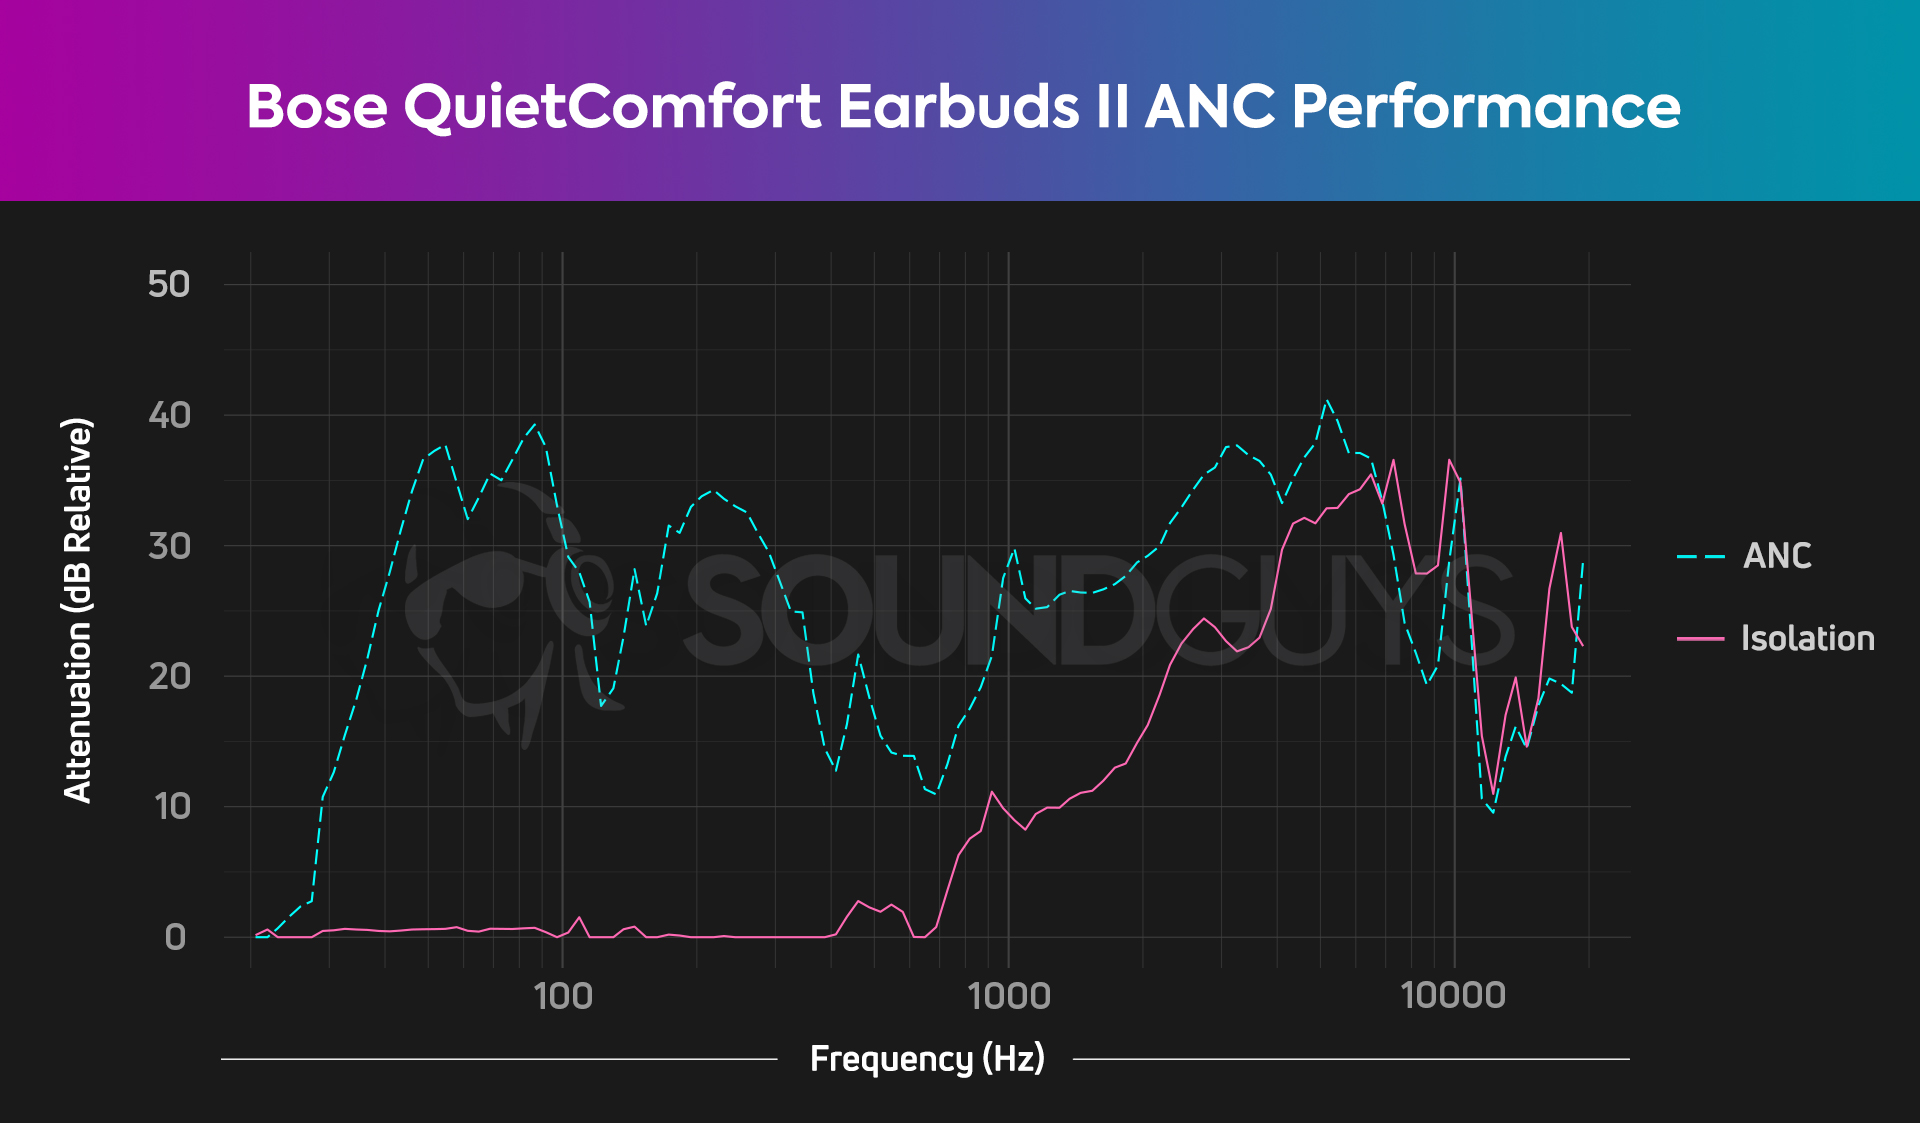 The Bose QuietComfort Earbuds II doesn't insert very far into the ear canal, so there are some tradeoffs when it comes to gross isolation and ANC performance.